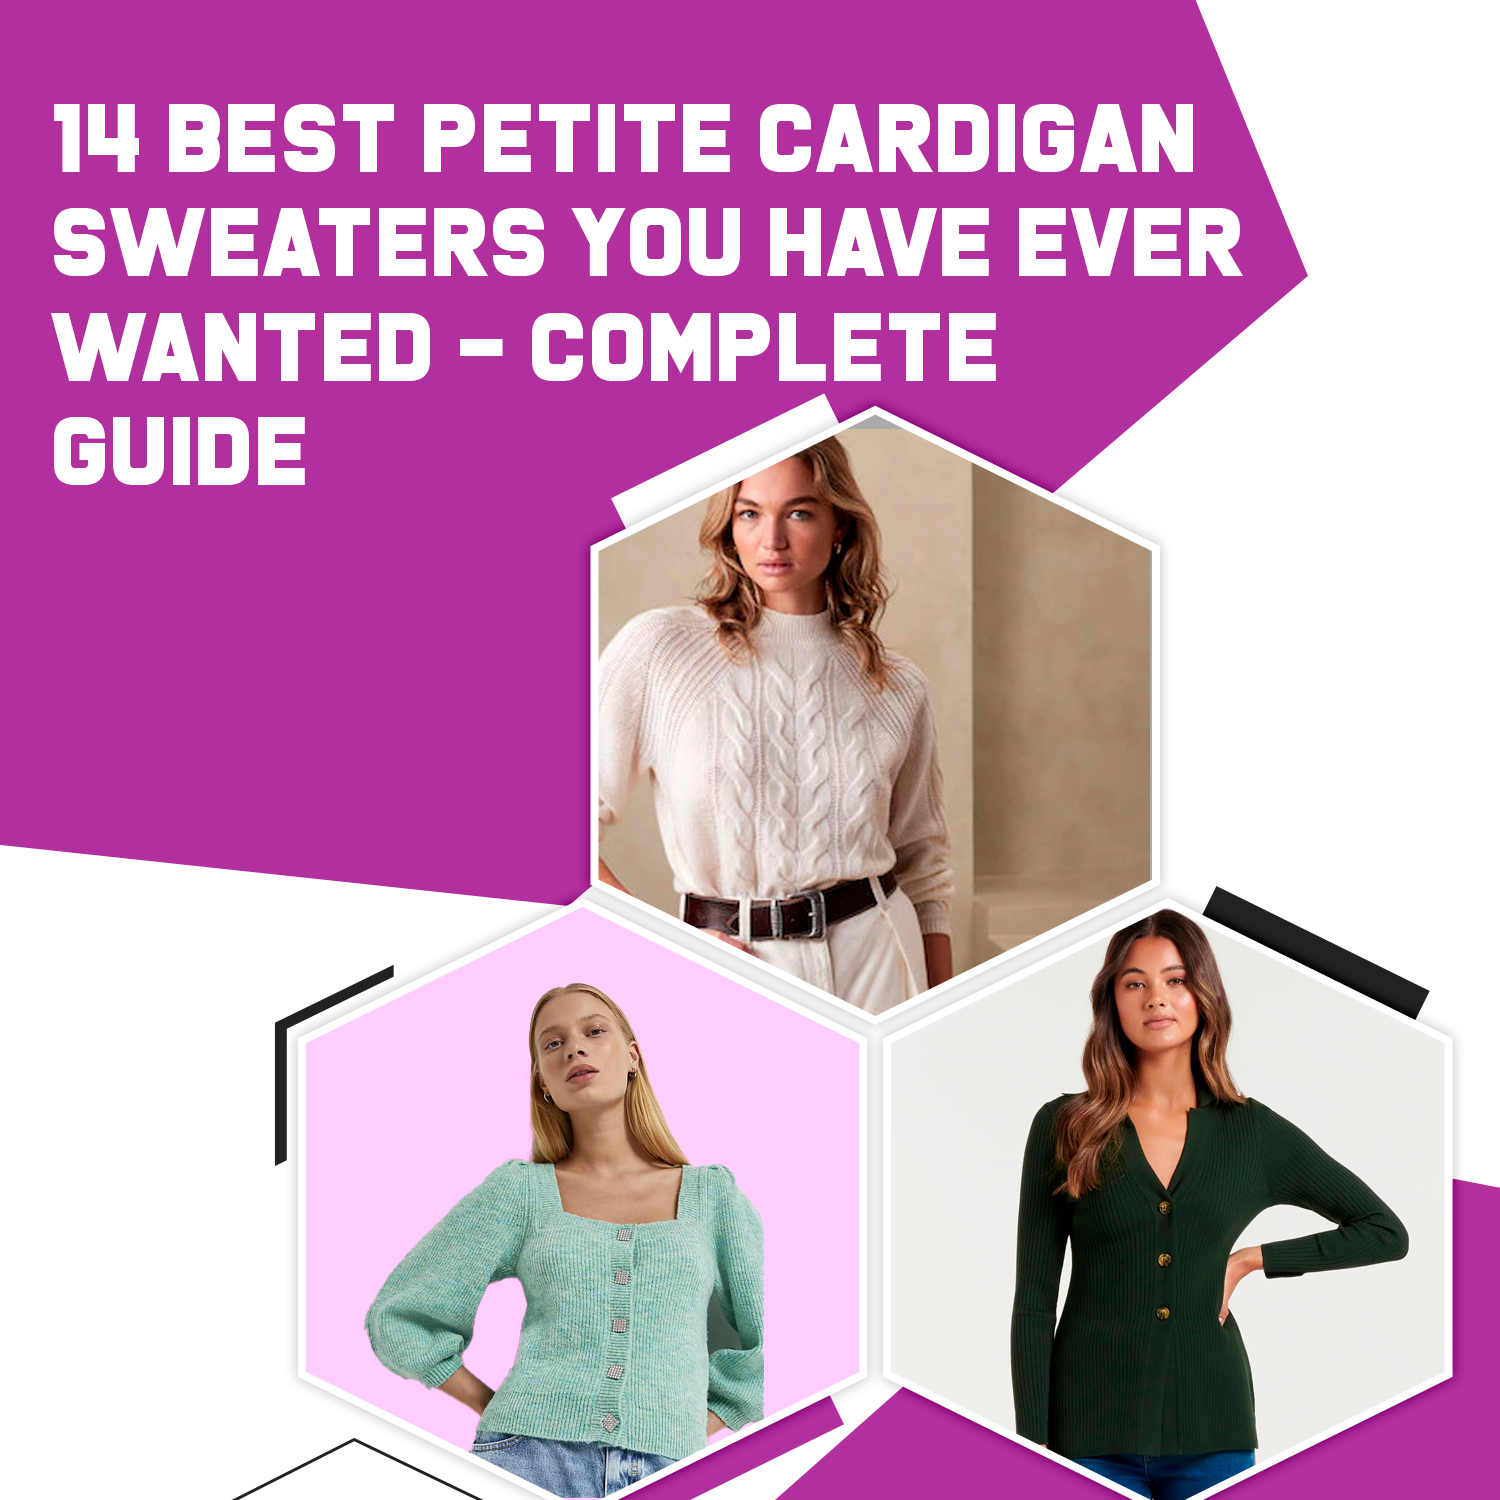 14 Best Petite Cardigan Sweaters You Have Ever Wanted – Complete Guide